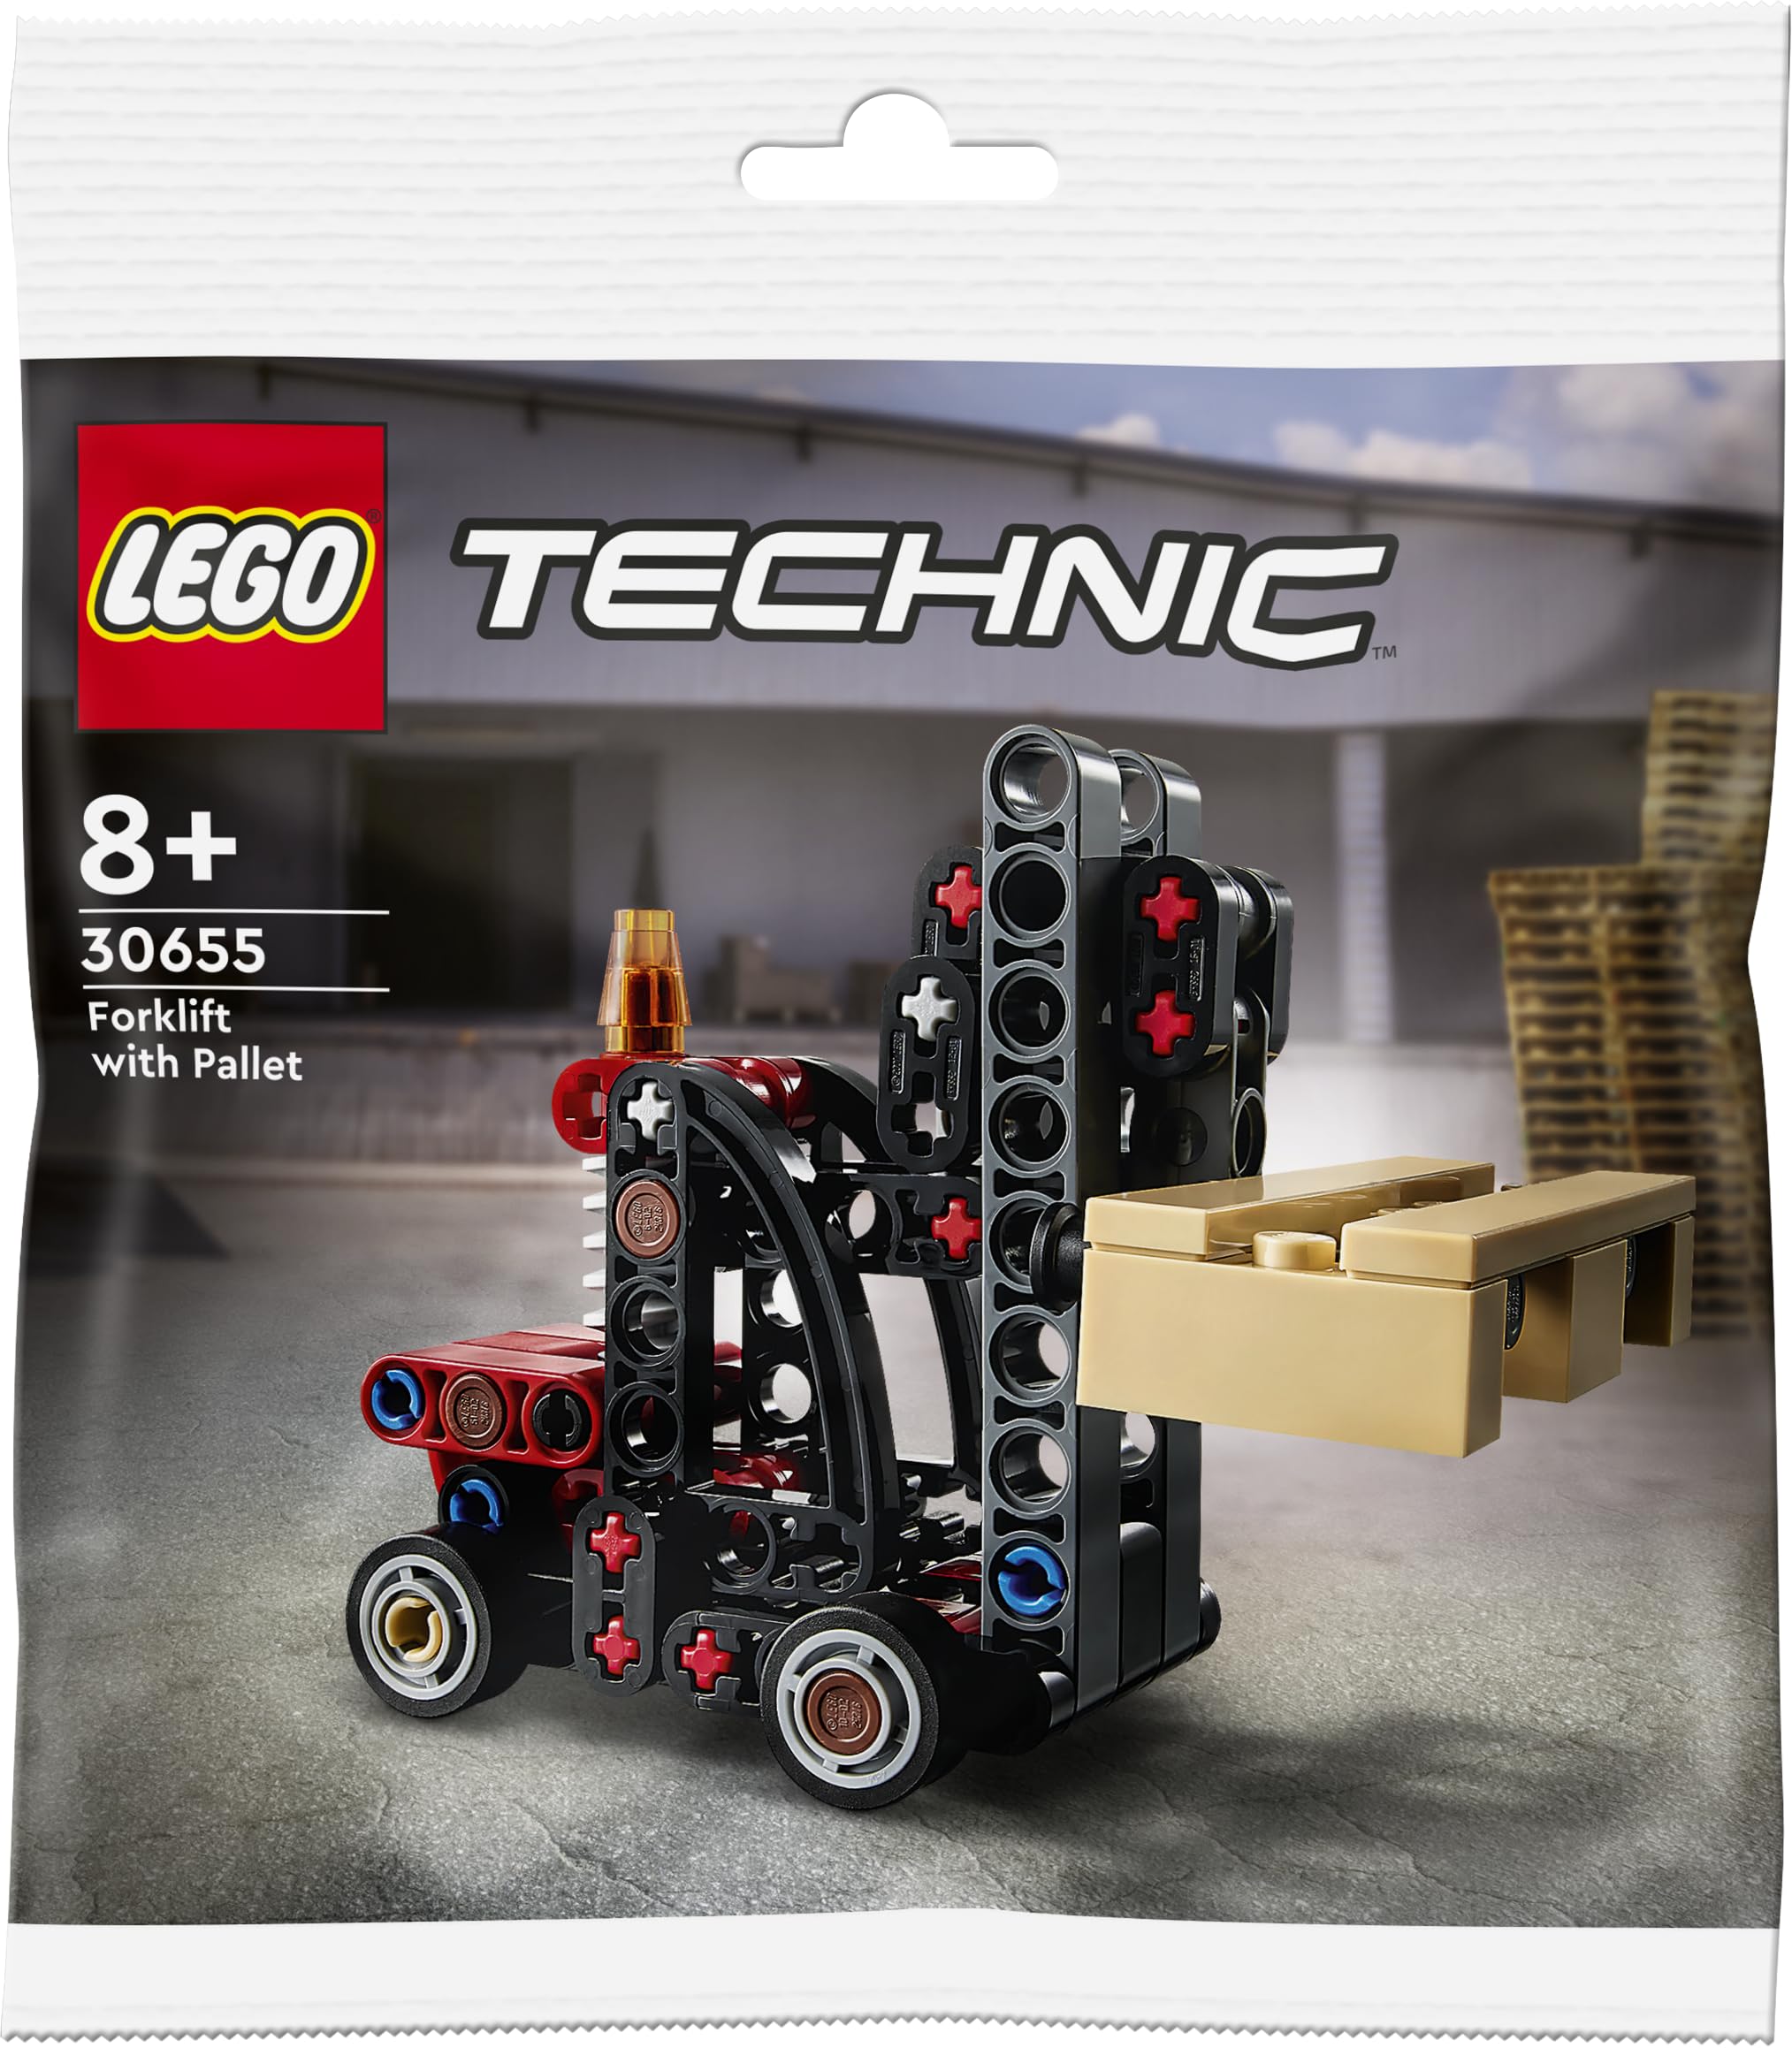 LEGO 30655 Forklift with Pallet polybag - New.